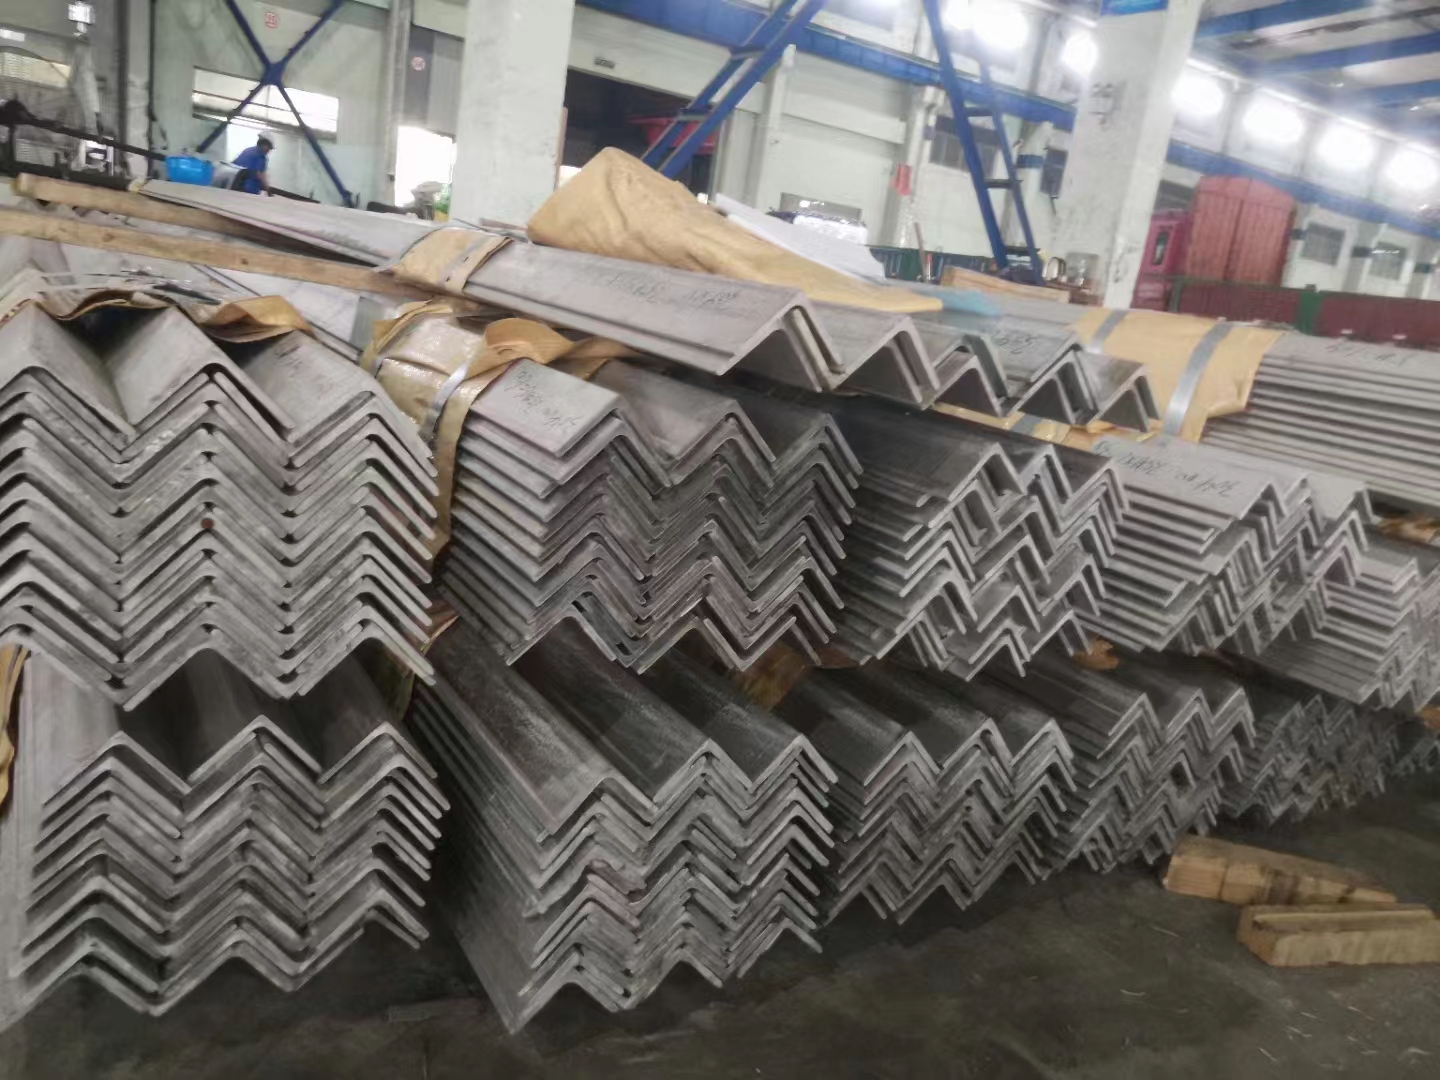 China Supply Hot Sale High Quality ASTM A36 20mm Thickness Hot Rolled Carbon Steel Plate Price